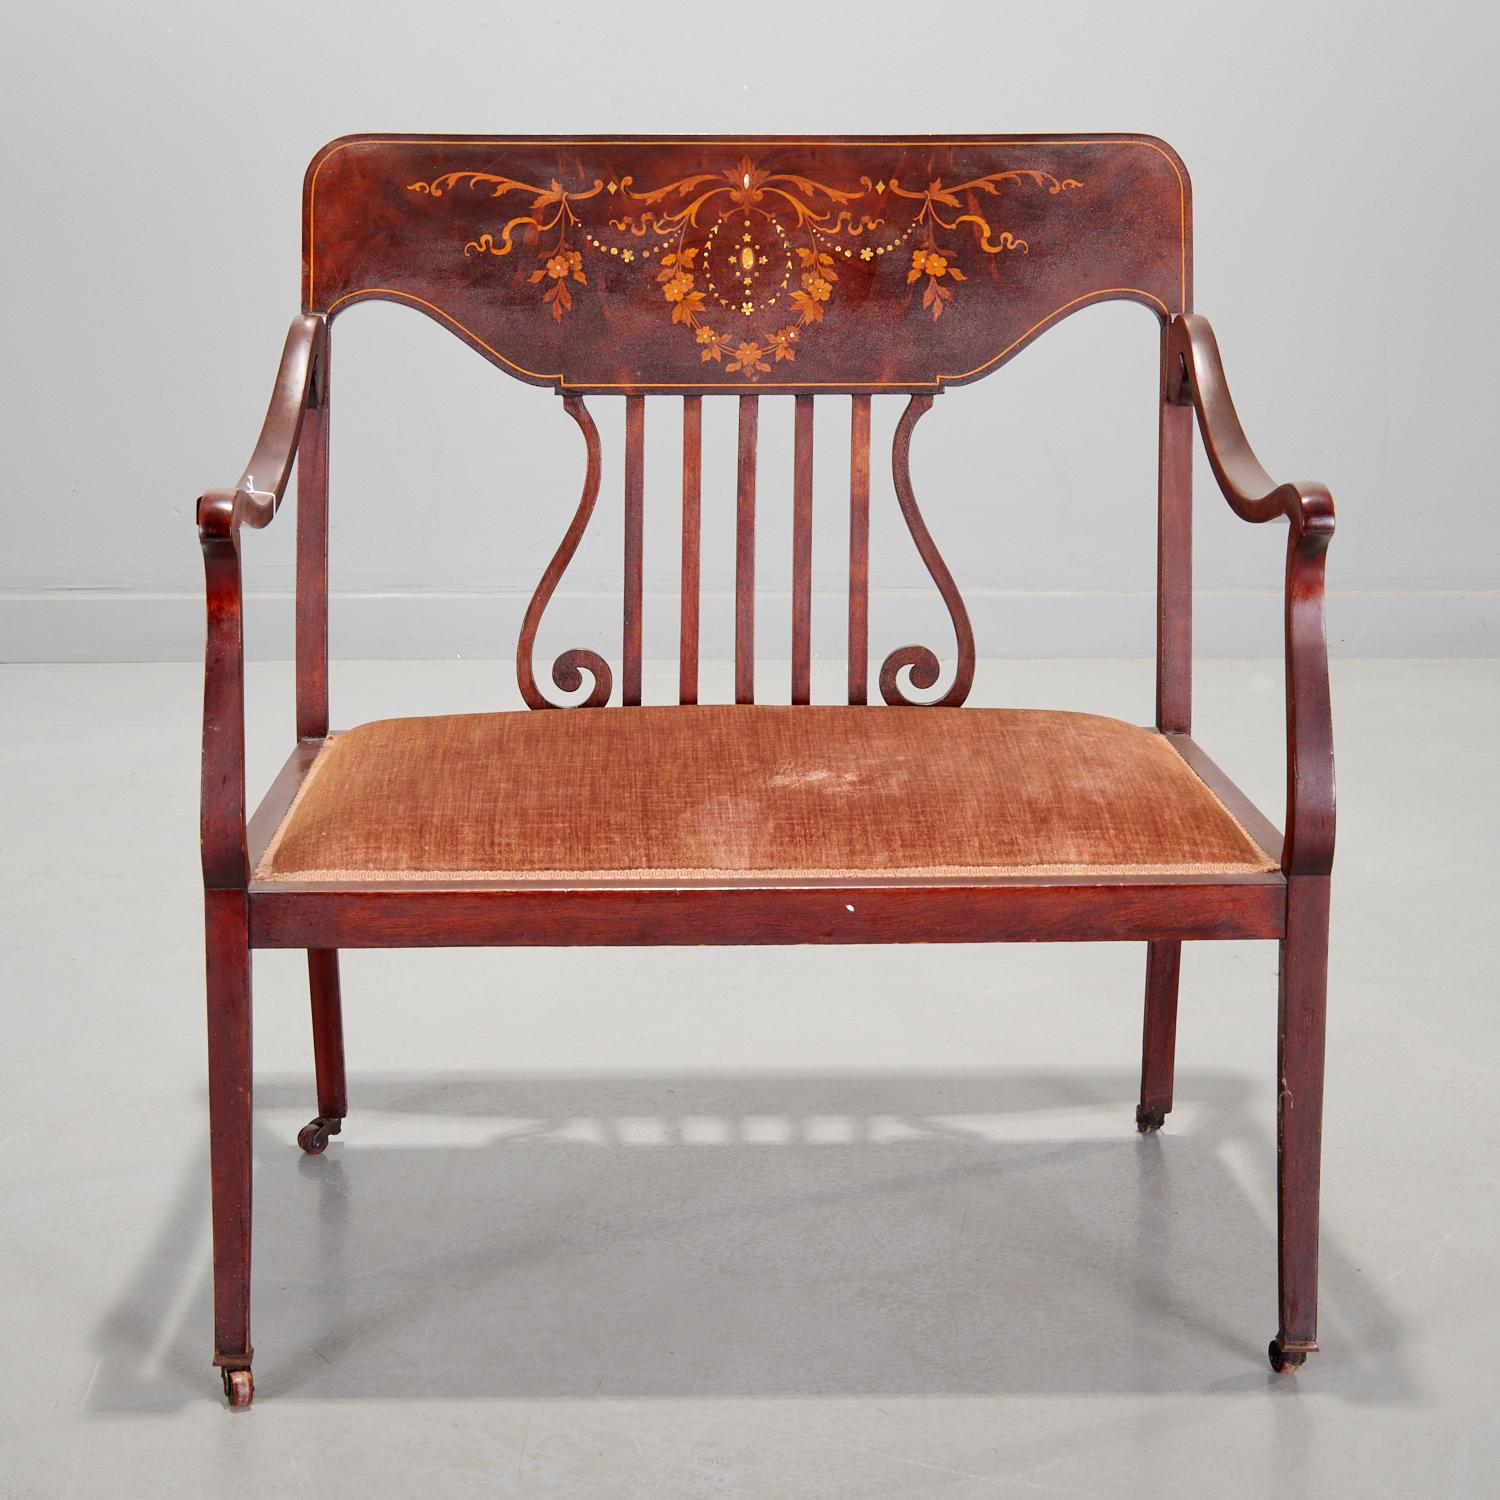 Early 20th c., settee with mother of pearl and satinwood inlay in a floral wreath and swag design set into a flame mahogany back. A lyre slat back lends a lightness to the piece. With a light brown strie velvet upholstered seat and contrasting